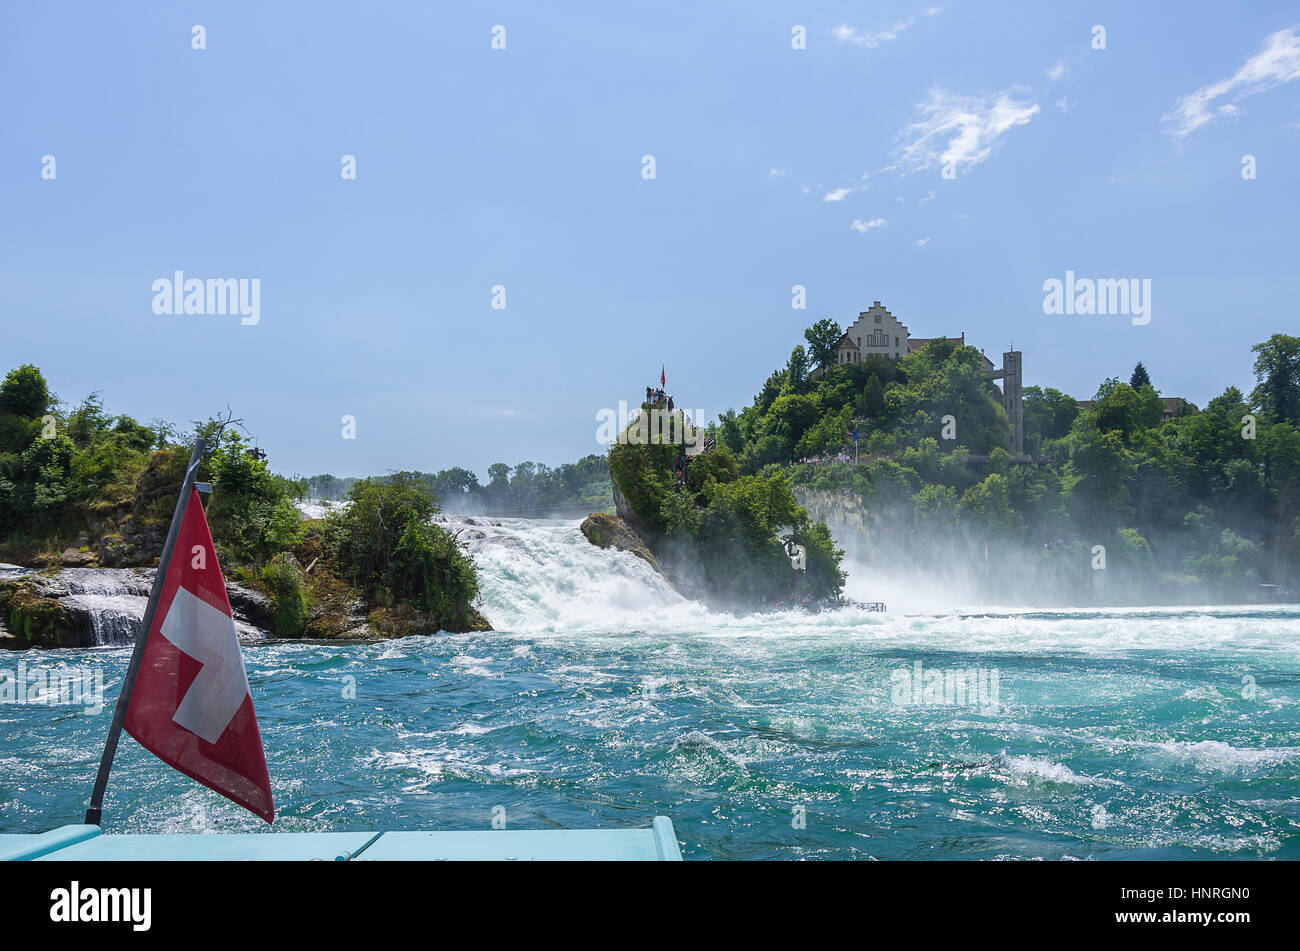 On the Rhine river in front of the Rhine Falls with view of Laufen Castle, Neuhausen, Switzerland. Stock Photo